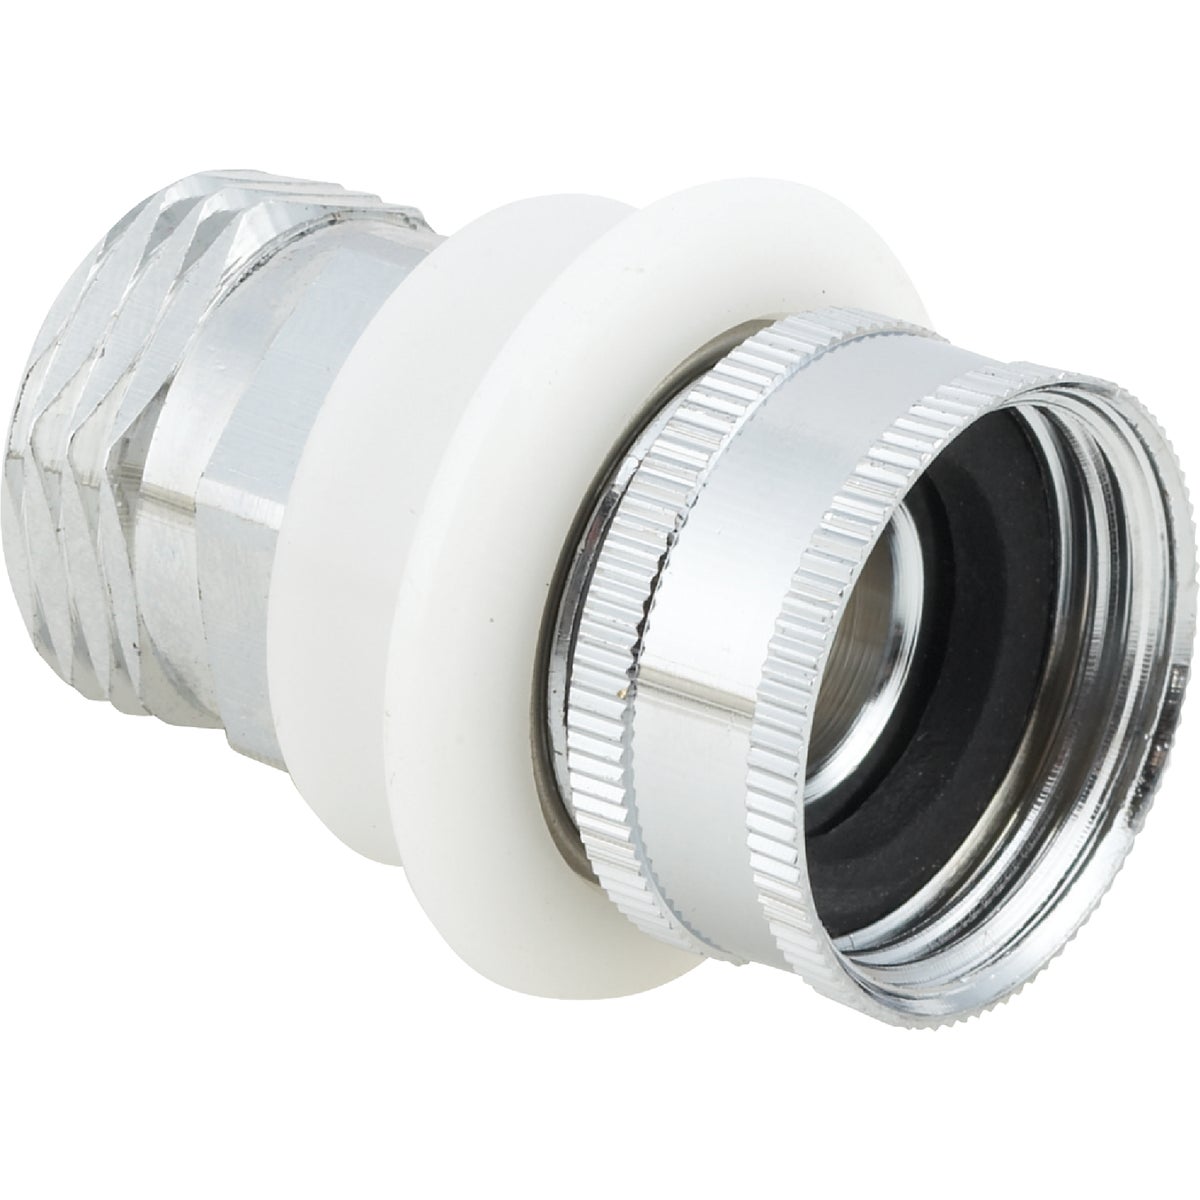 Do it 3/4" Male Hose Thread to Female Personal Shower Hose Connector Faucet Adapter